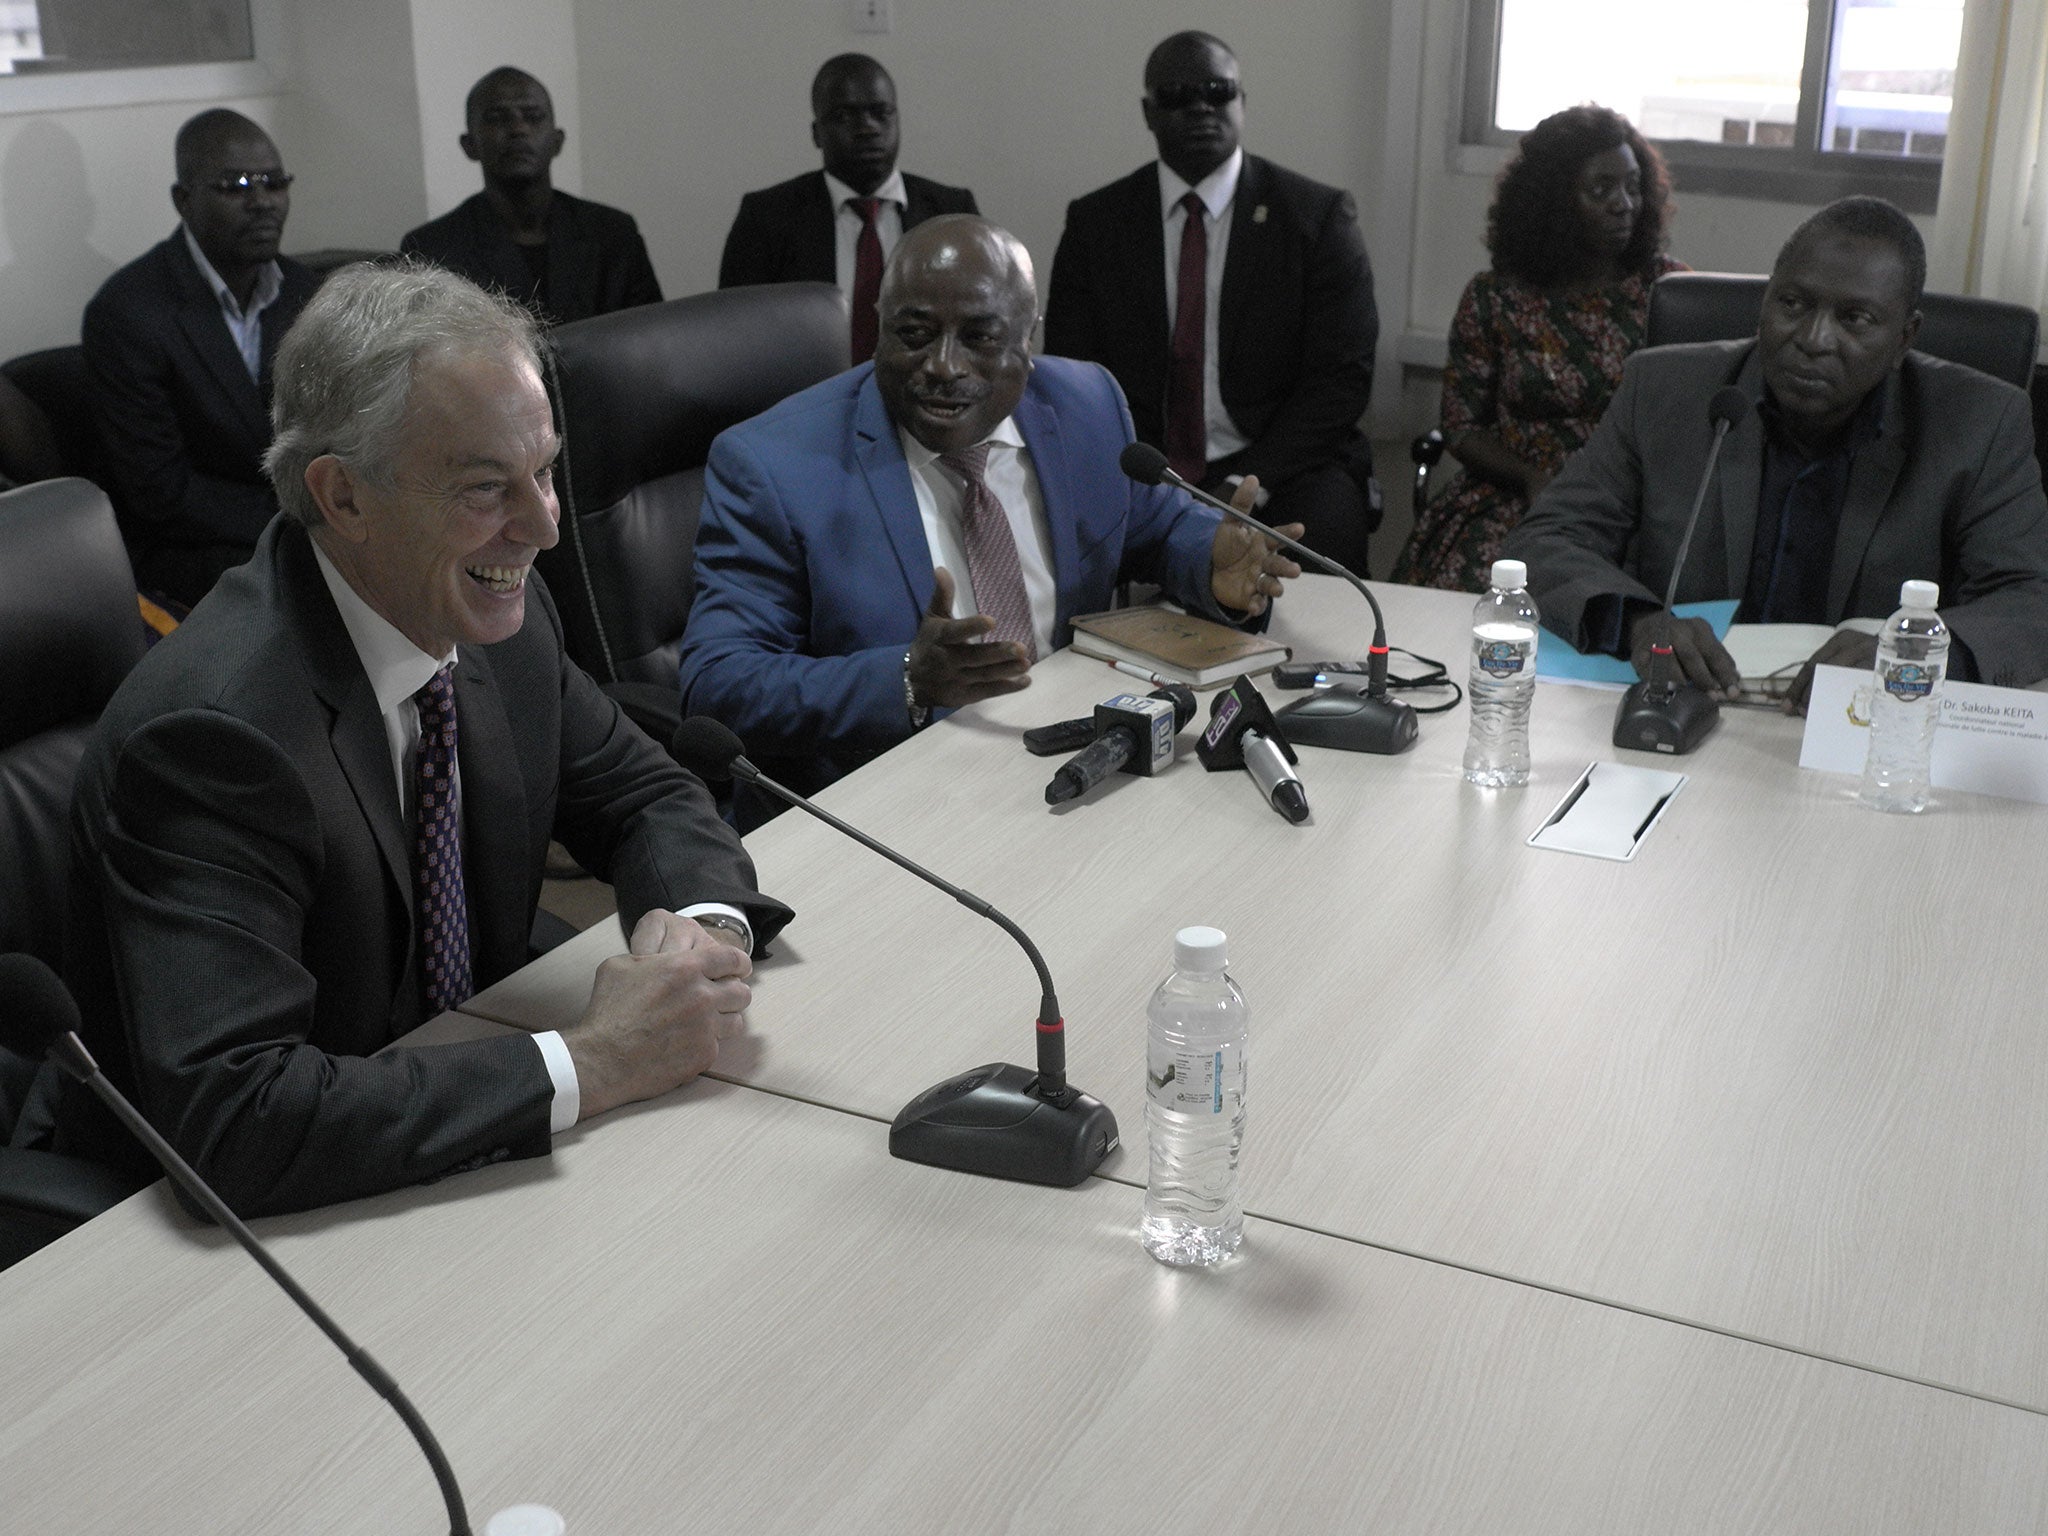 Tony Blair with African leaders on his visit to Ebola affected countries